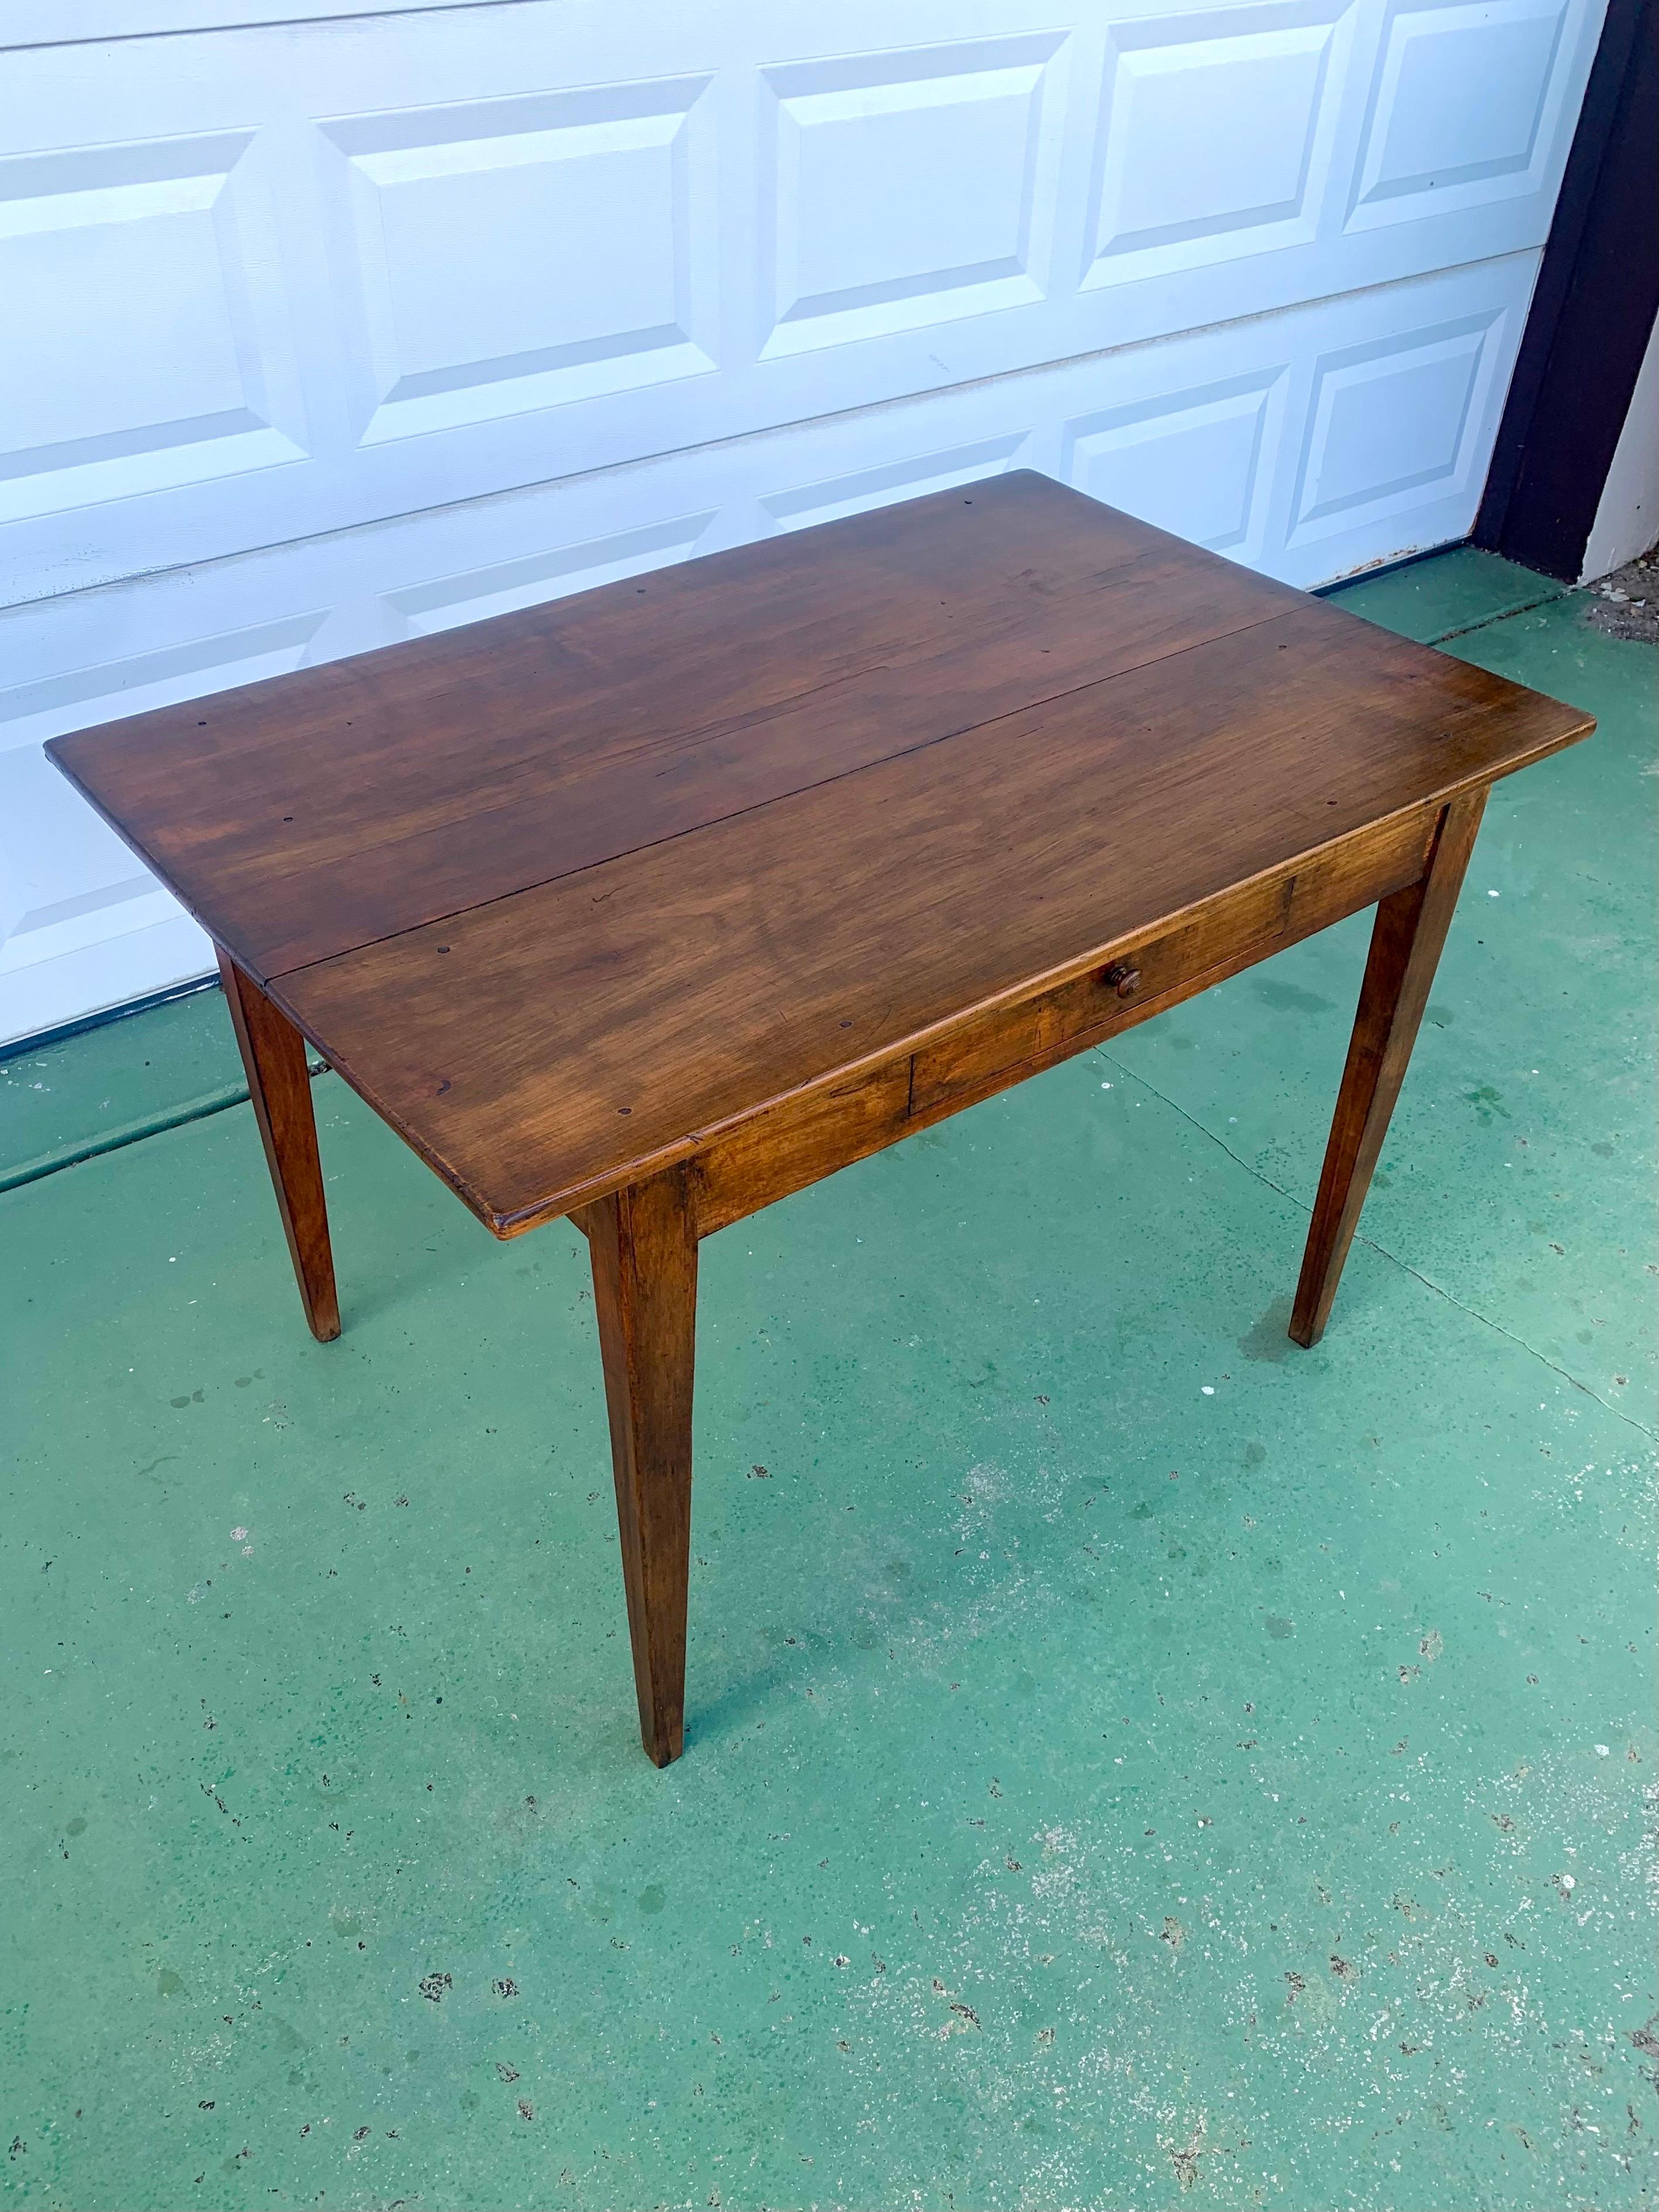 A primitive rustic farmhouse style table with a singe drawer. Top consists of two 12” wide planks with a 4.5” stretcher piece. Has wear and nail heads that show through but has a dark finish on it as well. Age is still well apparent when viewing the